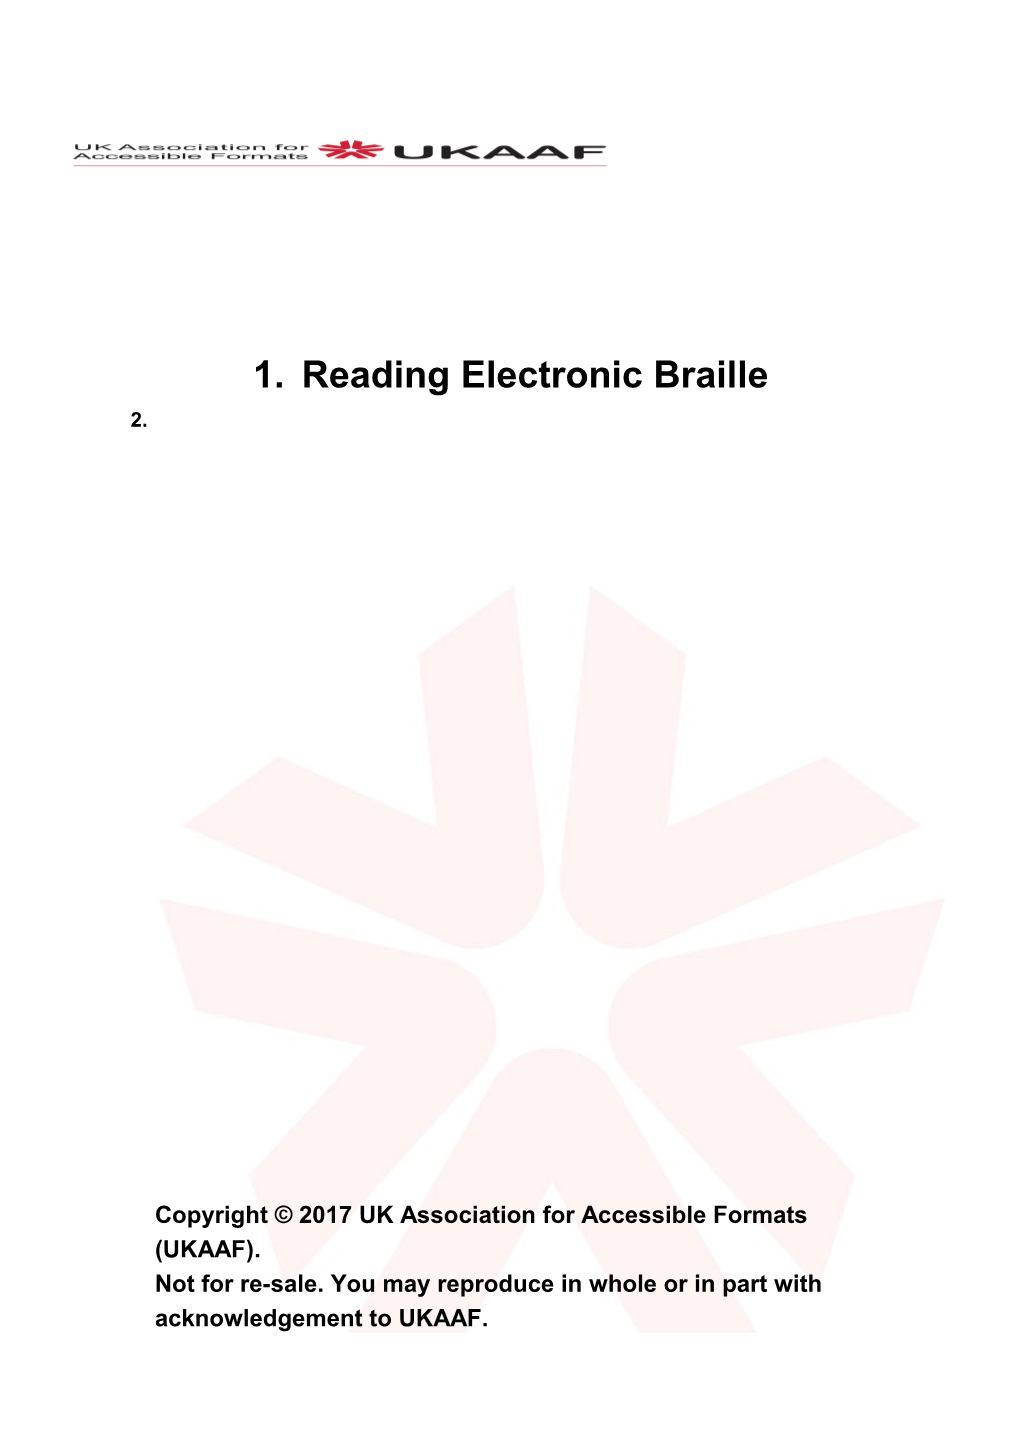 Reading Electronic Braille